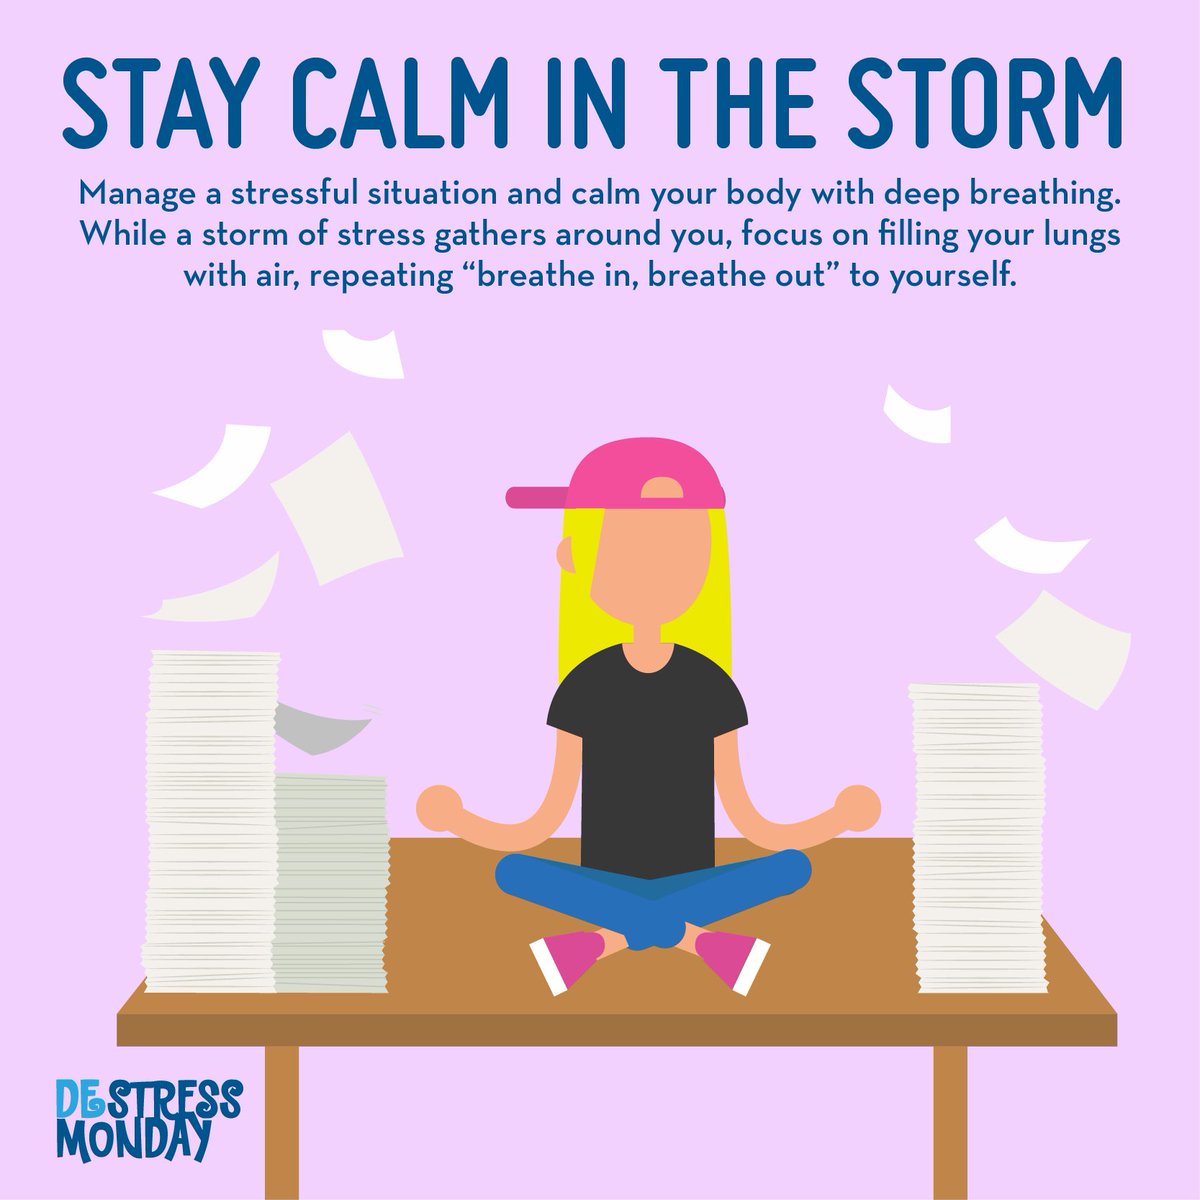 What you can do to address stress